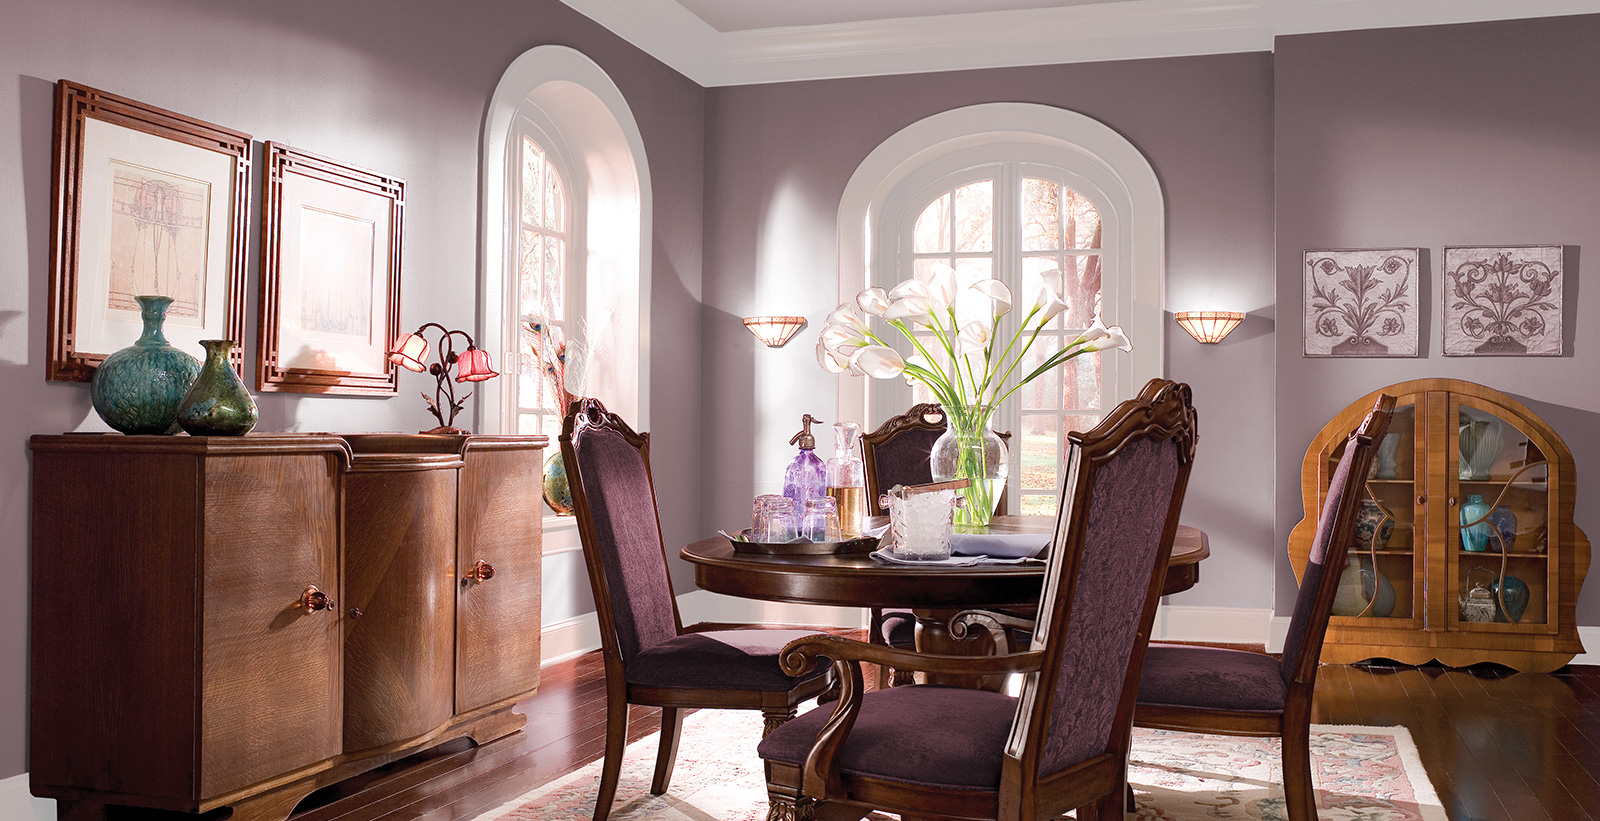 Dining room in the Art Nouveau style with mauve paint on walls, white paint on trim and pale gray on arched window trim.